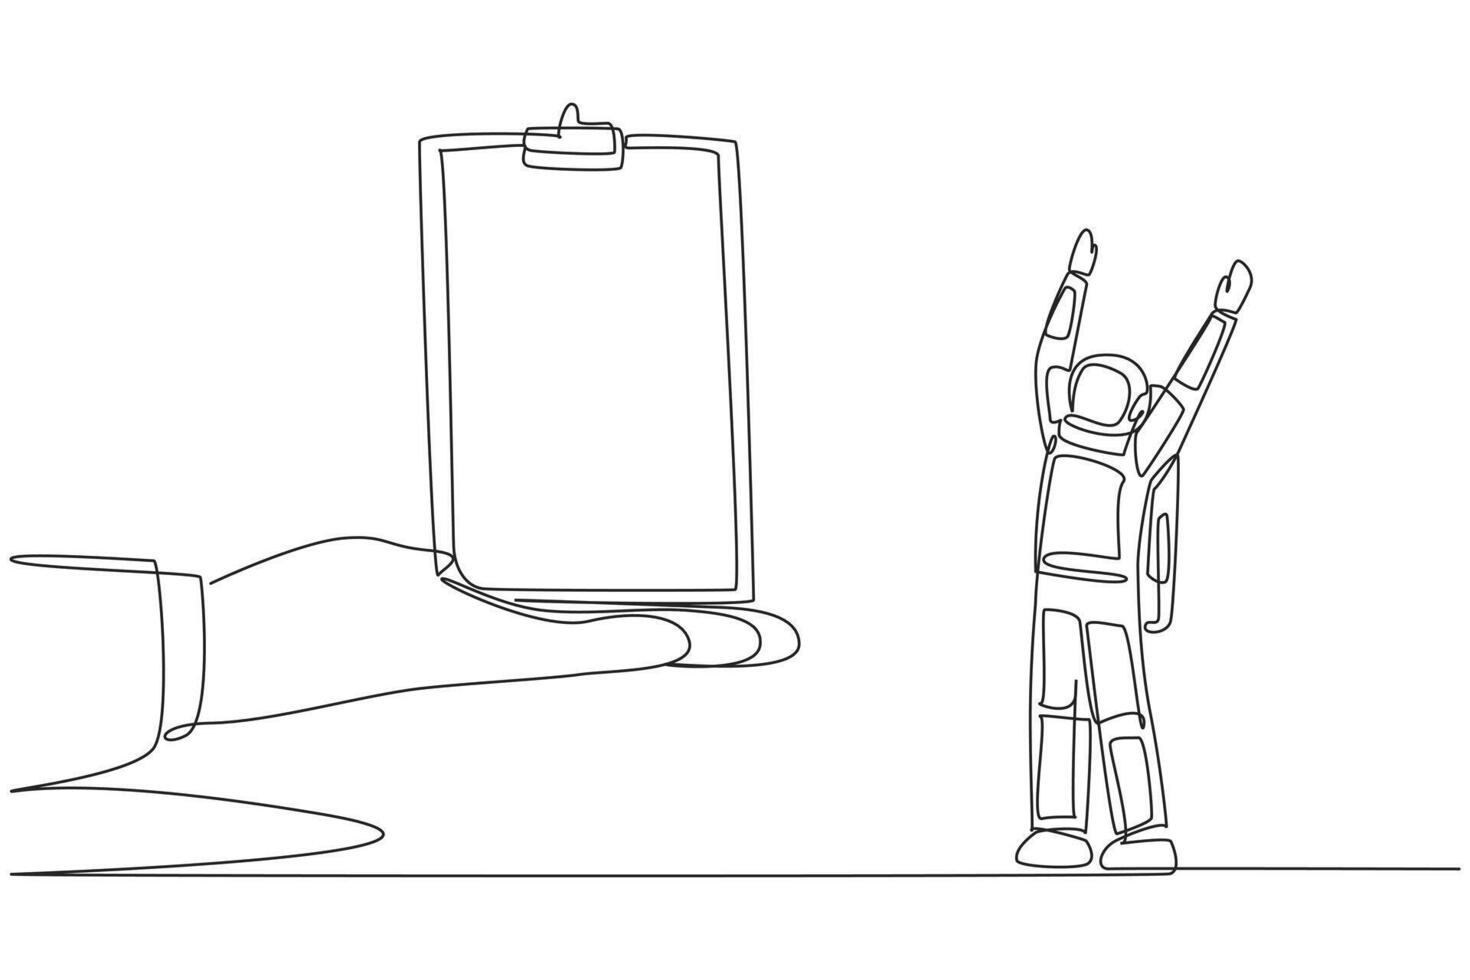 Continuous one line drawing the astronaut was excited to get the clipboard from a giant hand. Making checklists. Manual expedition recording. Cosmonaut. Single line draw design illustration vector